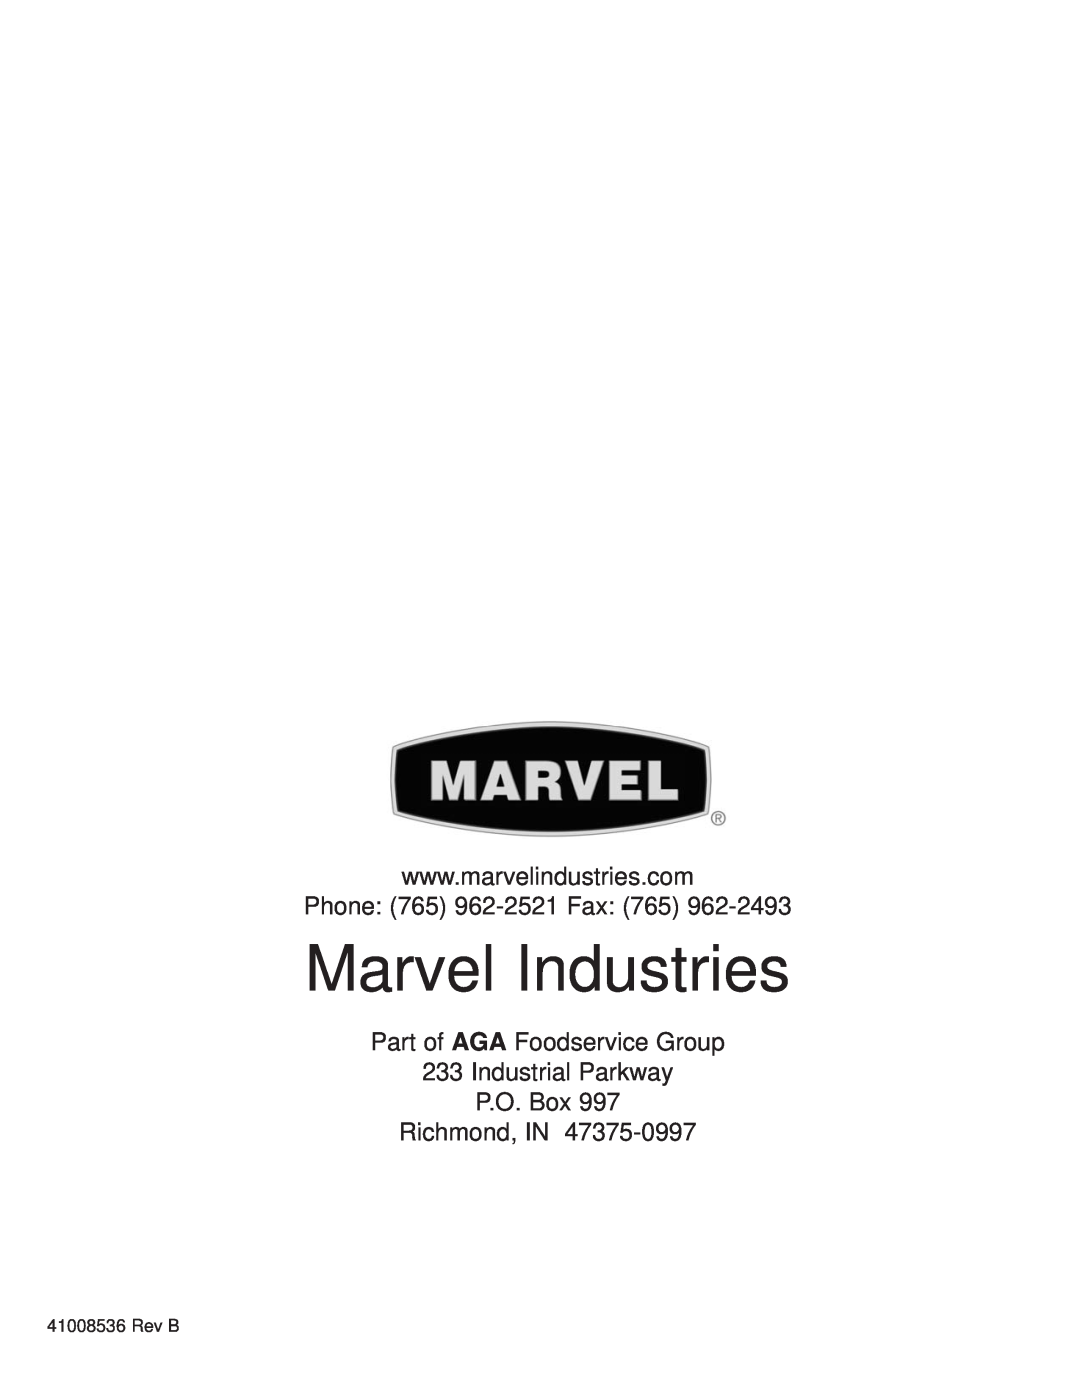 Marvel Industries 6CiM Phone 765 962-2521Fax, Part of AGA Foodservice Group, Industrial Parkway P.O. Box Richmond, IN 